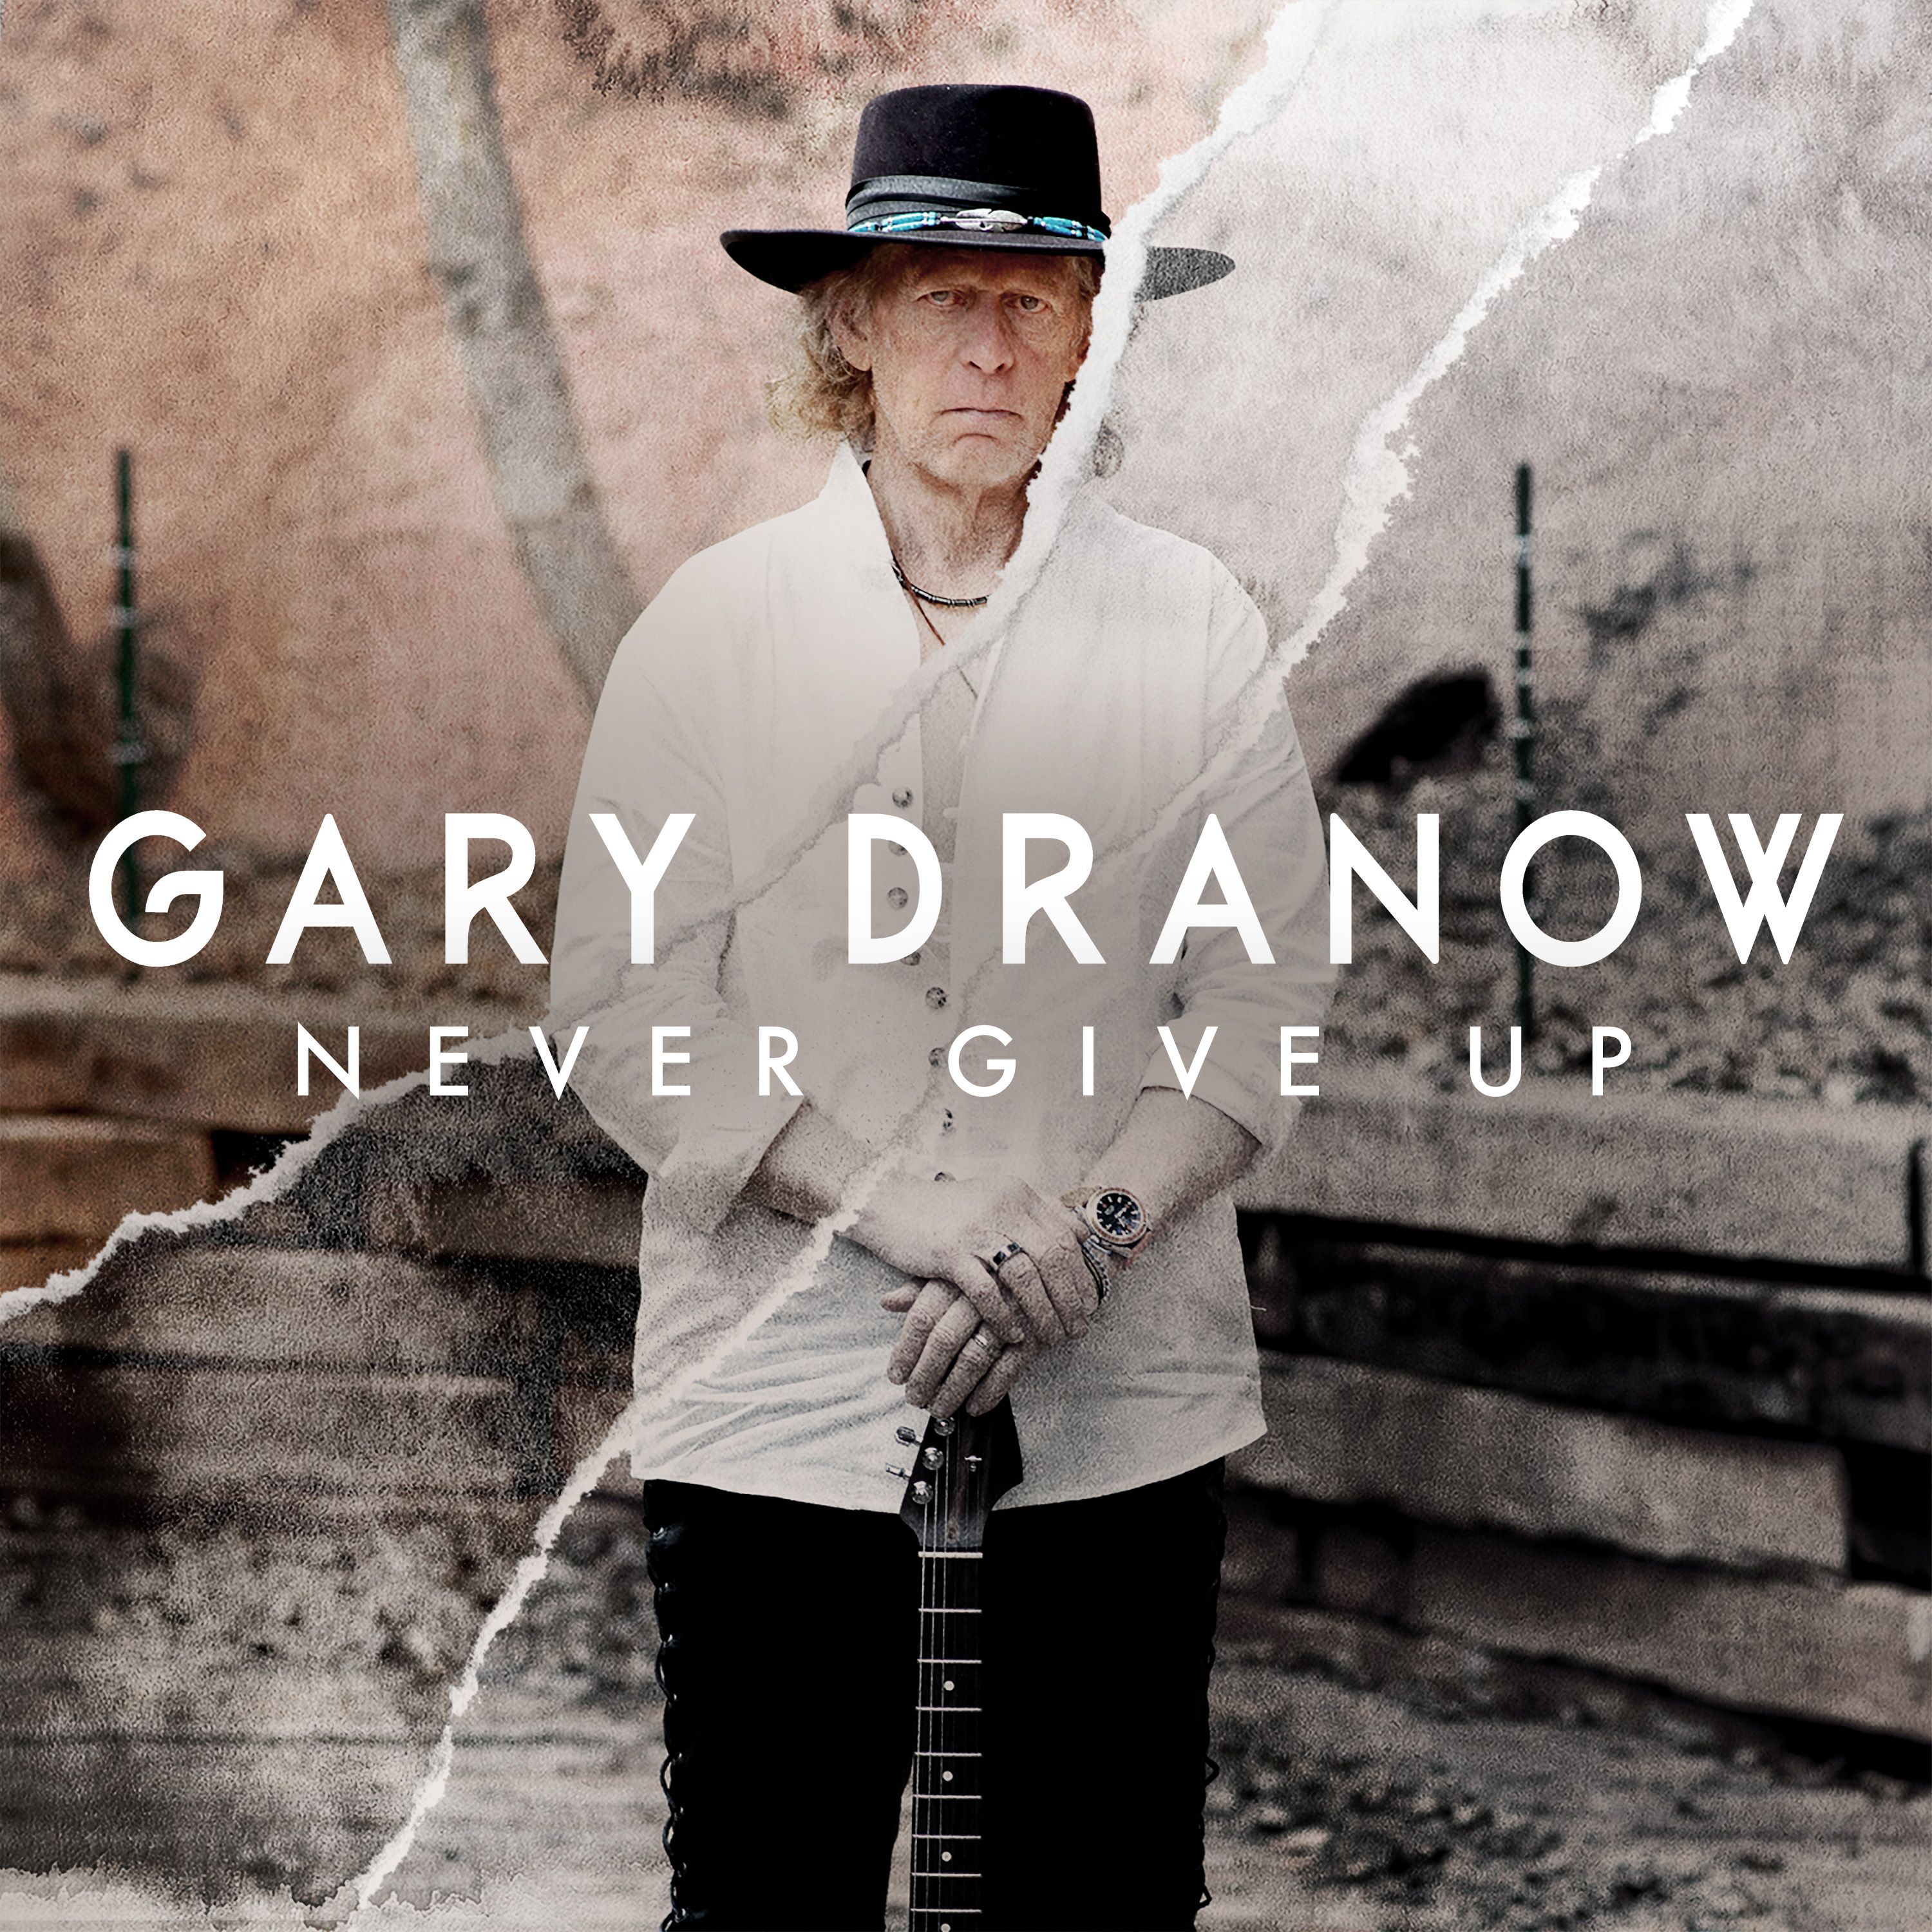 Gary Dranow – “All That!”